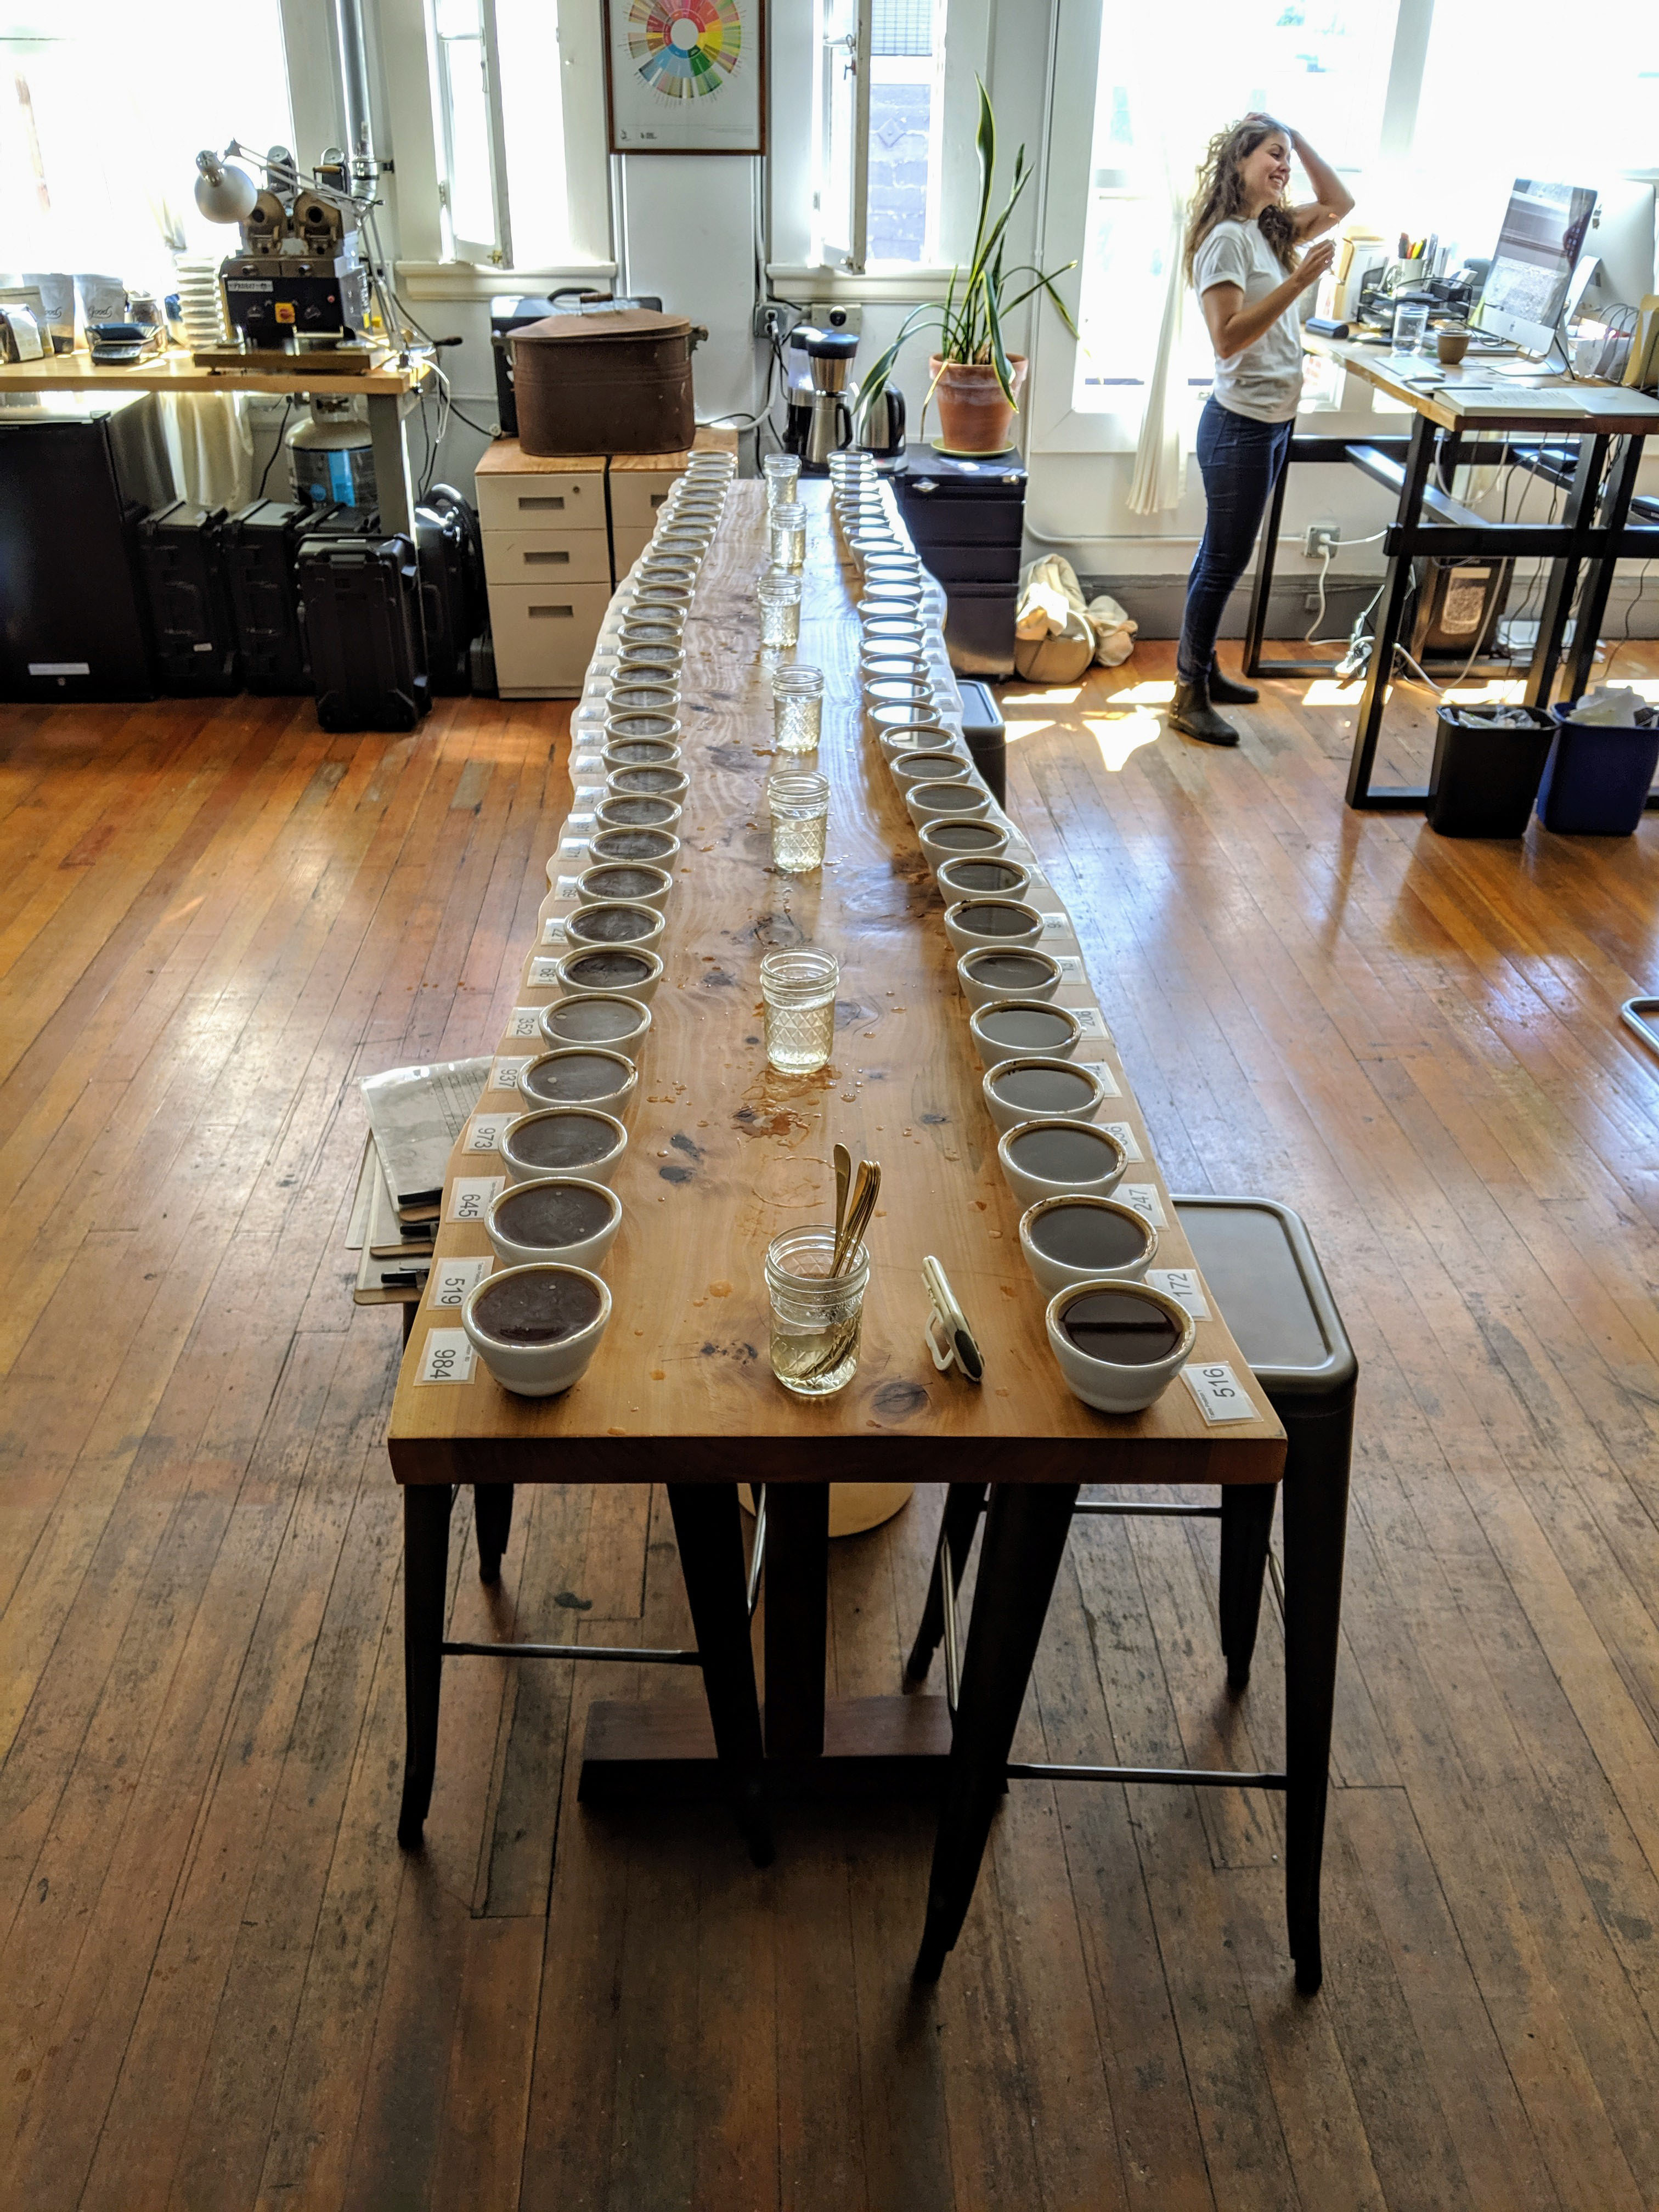 About to cup a large table in the Berkeley lab.